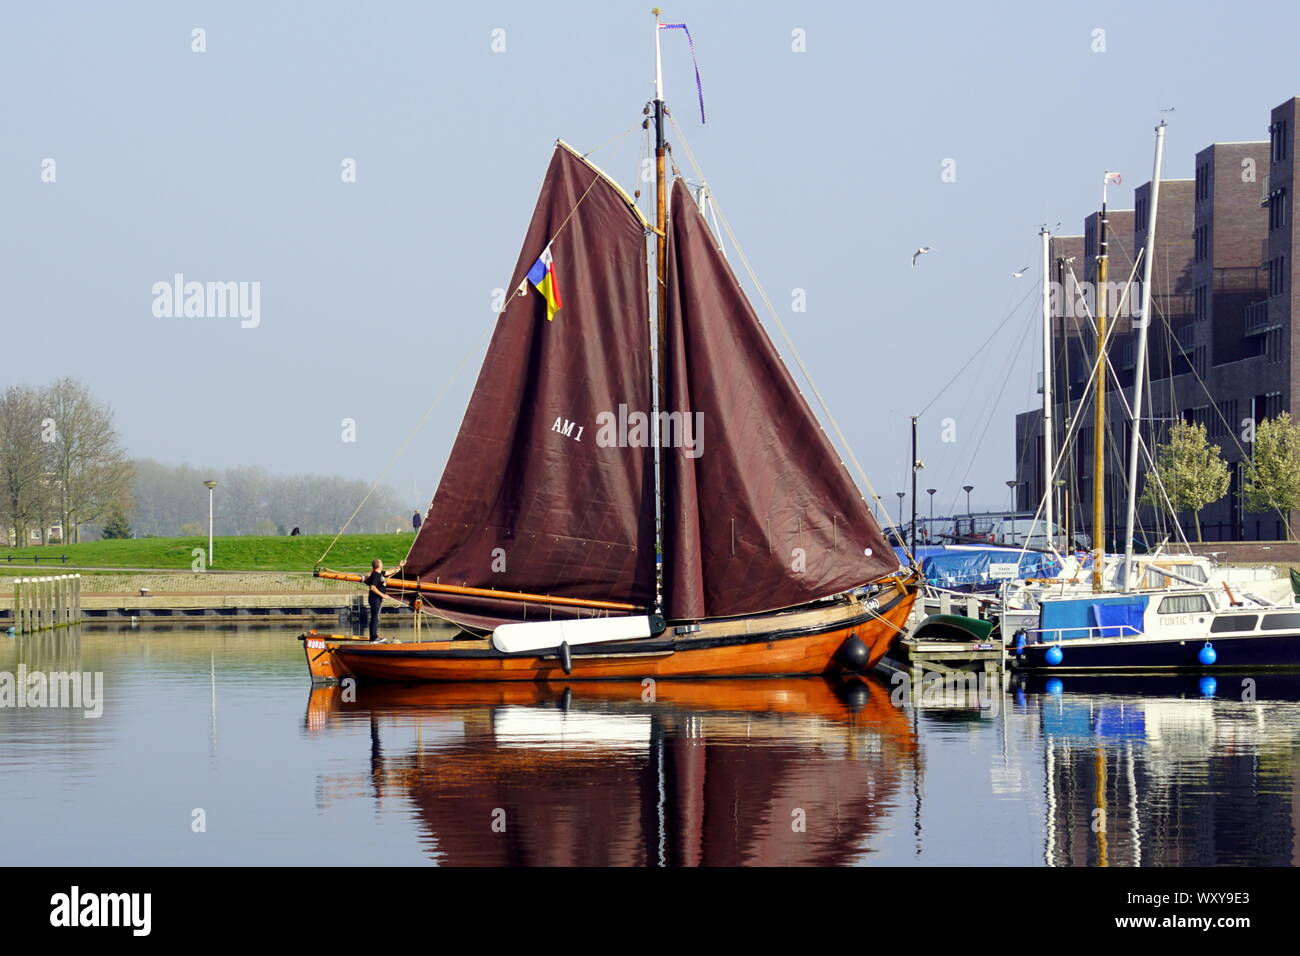 Almere, the Netherlands - March 29, 2019: Traditional wooden visser ship in the harbor of Almere Haven. Stock Photo